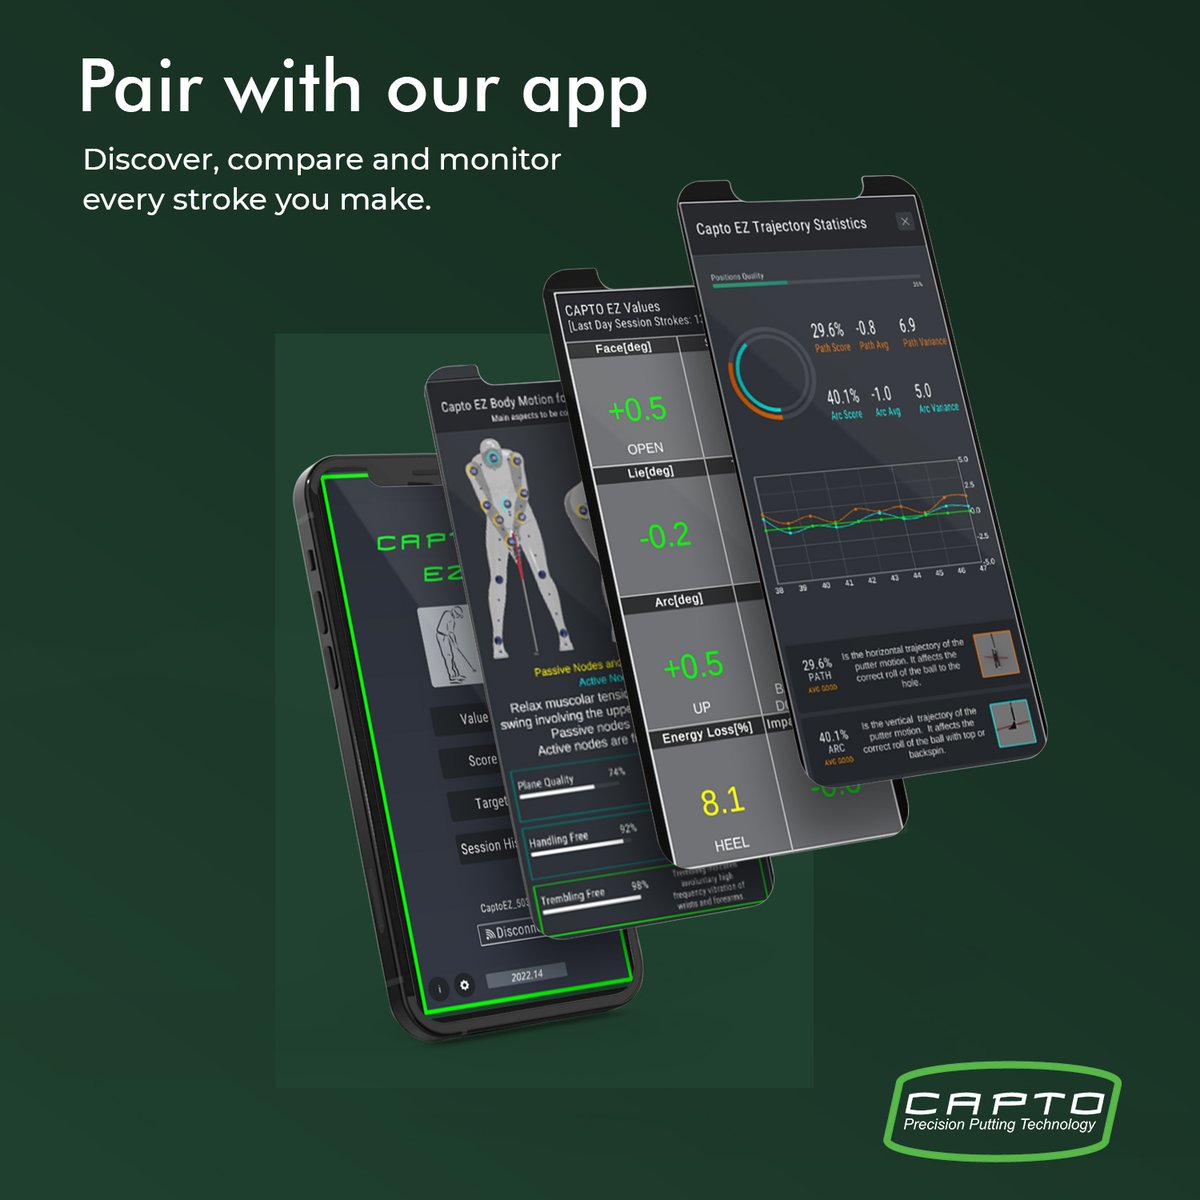 Capto measures every shot from the shortest putt to the longest – all to the highest of accuracy levels

Work on your stroke, improve your score!

Enjoy Capto !

Get better and better with Capto EZ!

#captogolf #captoputting #putting #improveyourputting